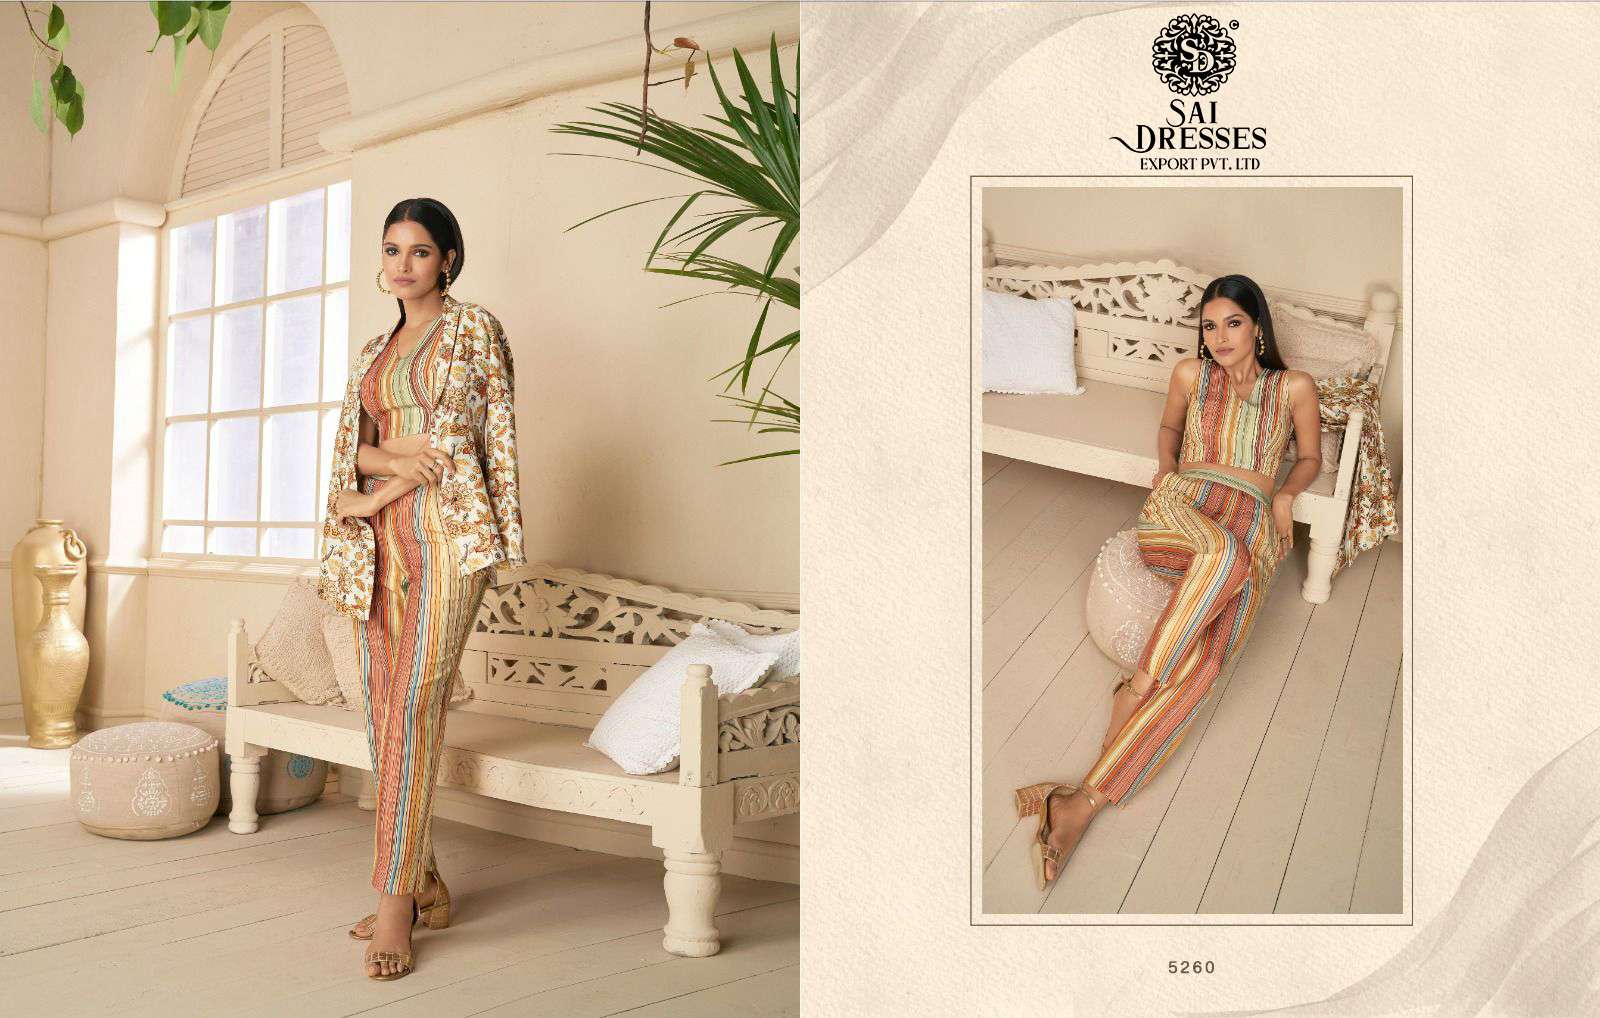 SAI DRESSES PRESENT SPRING SUMMER PRIME COLLECTION READYMADE EXCLUSIVE TRENDY WEAR CO-ORD SET IN WHOLESALE RATE IN SURAT